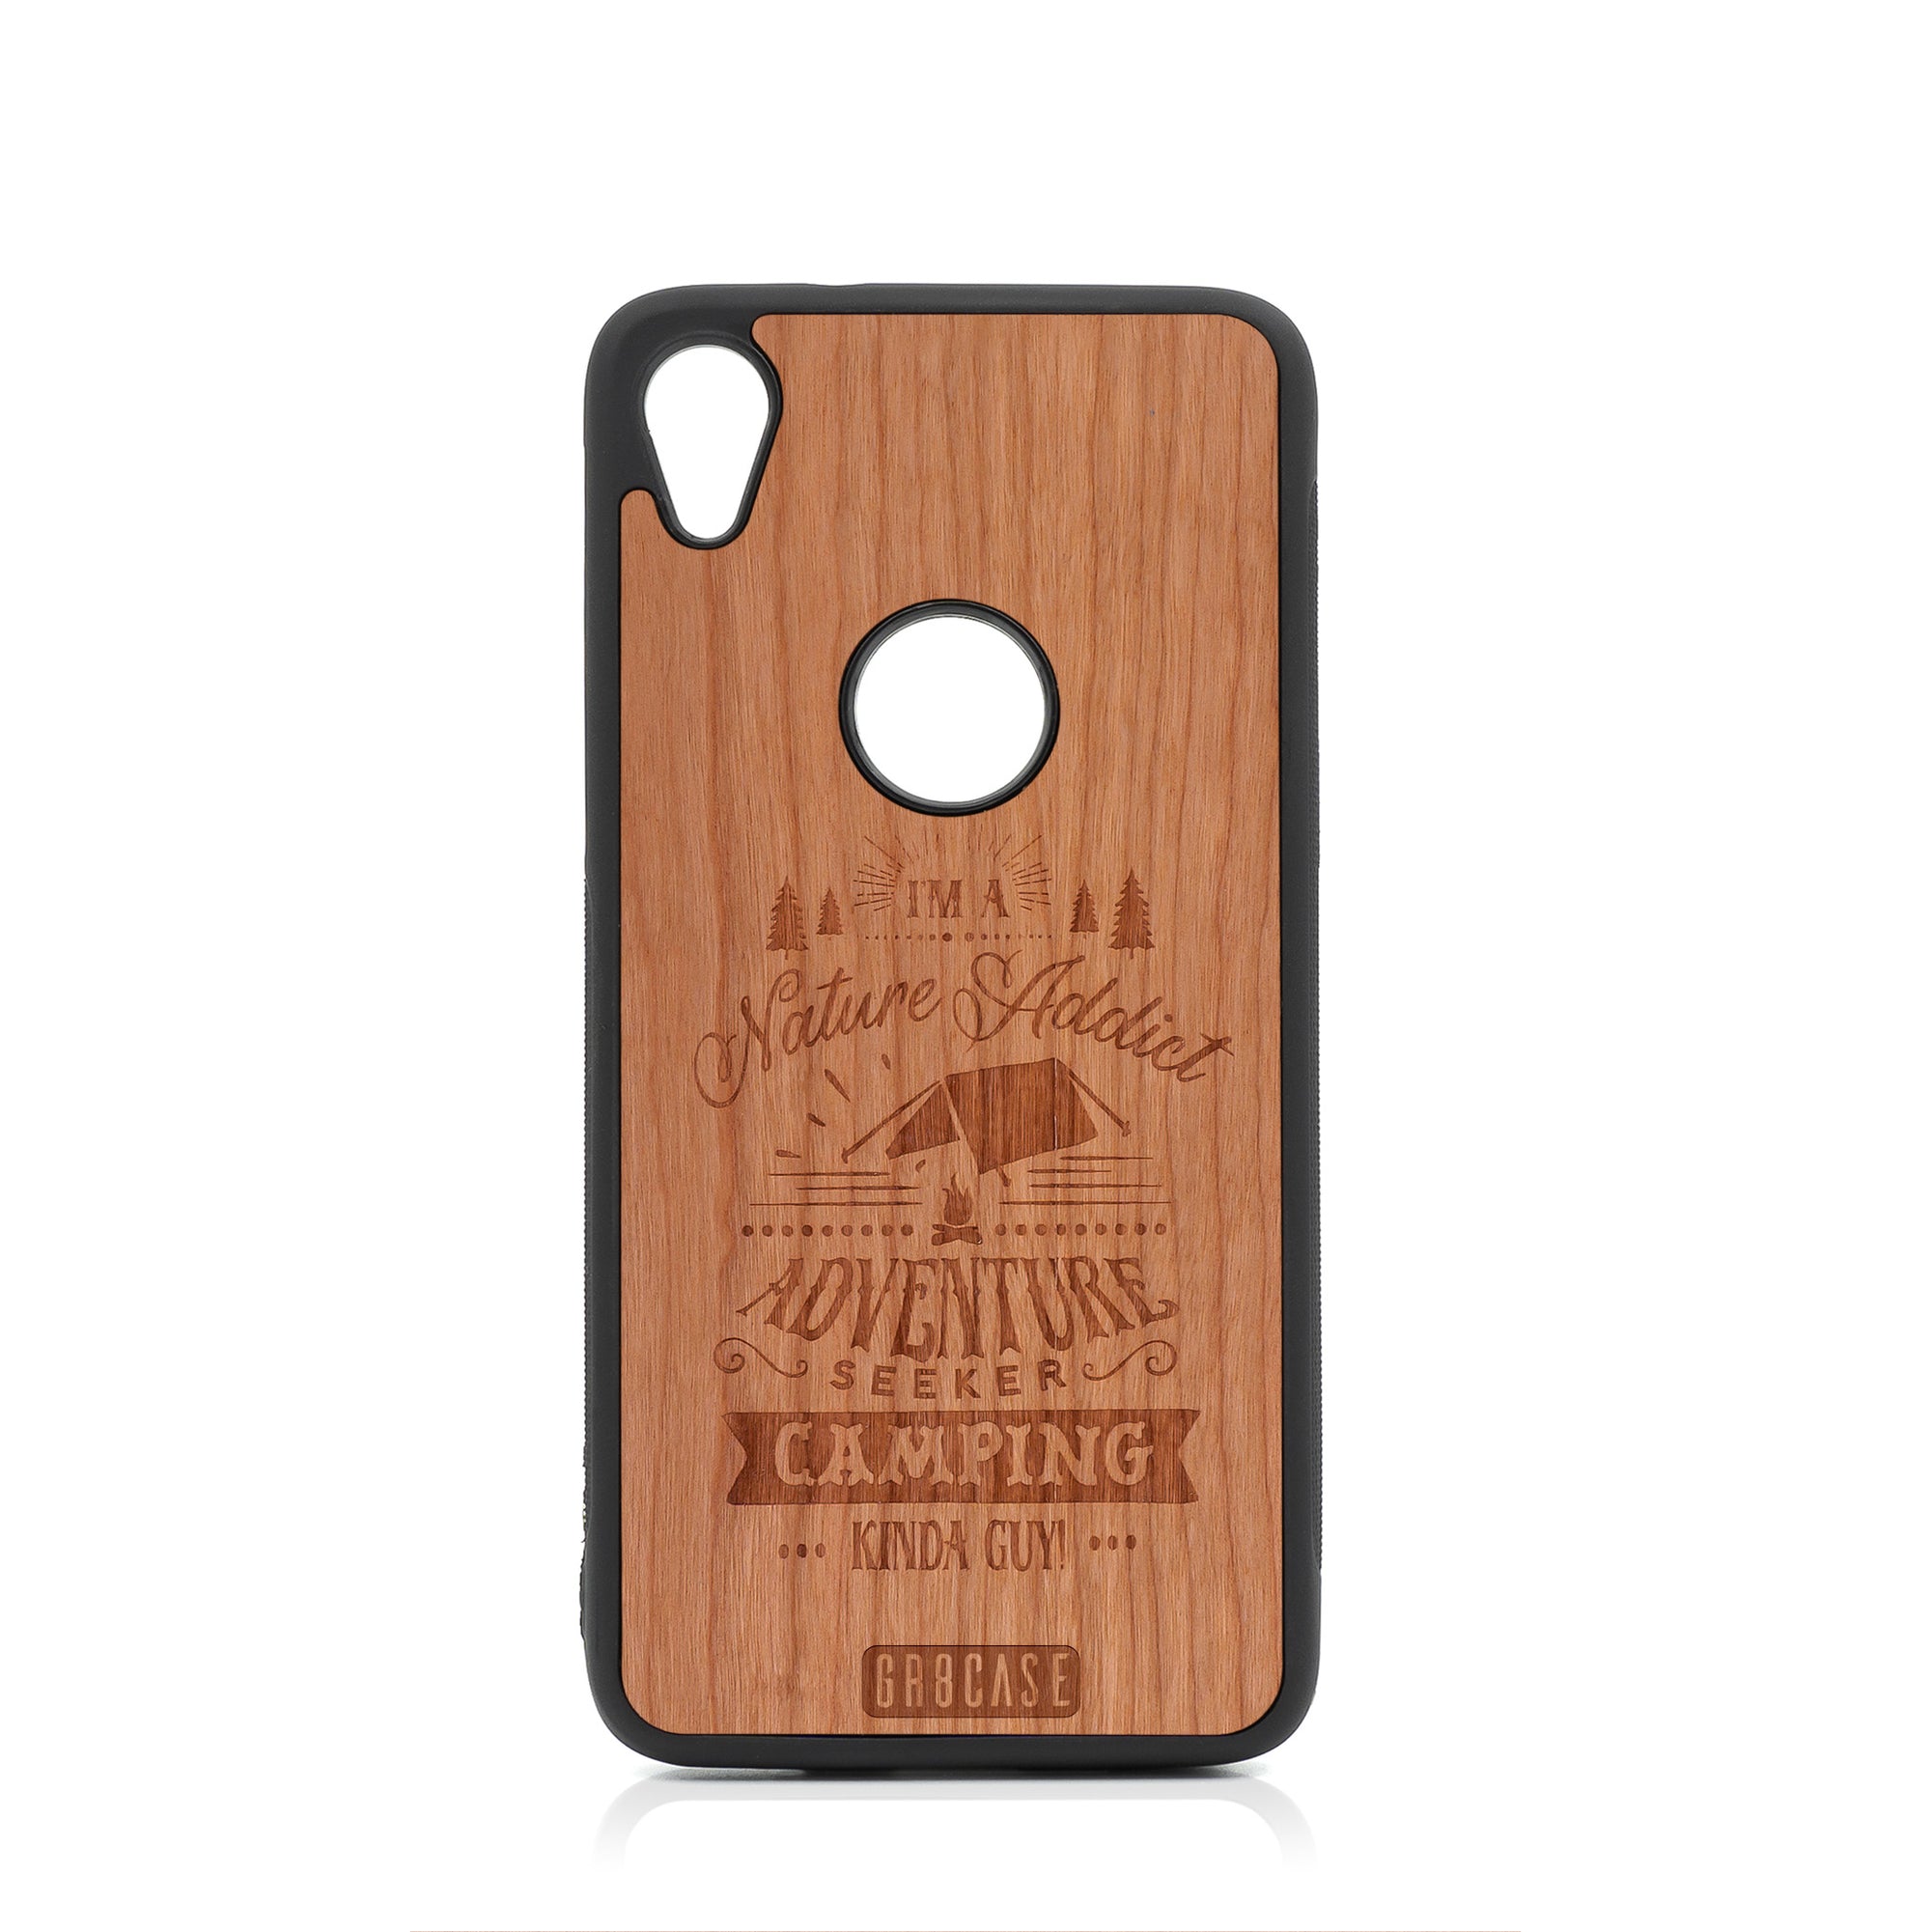 I'm A Nature Addict Adventure Seeker Camping Kinda Guy Design Wood Case For Moto E6 by GR8CASE